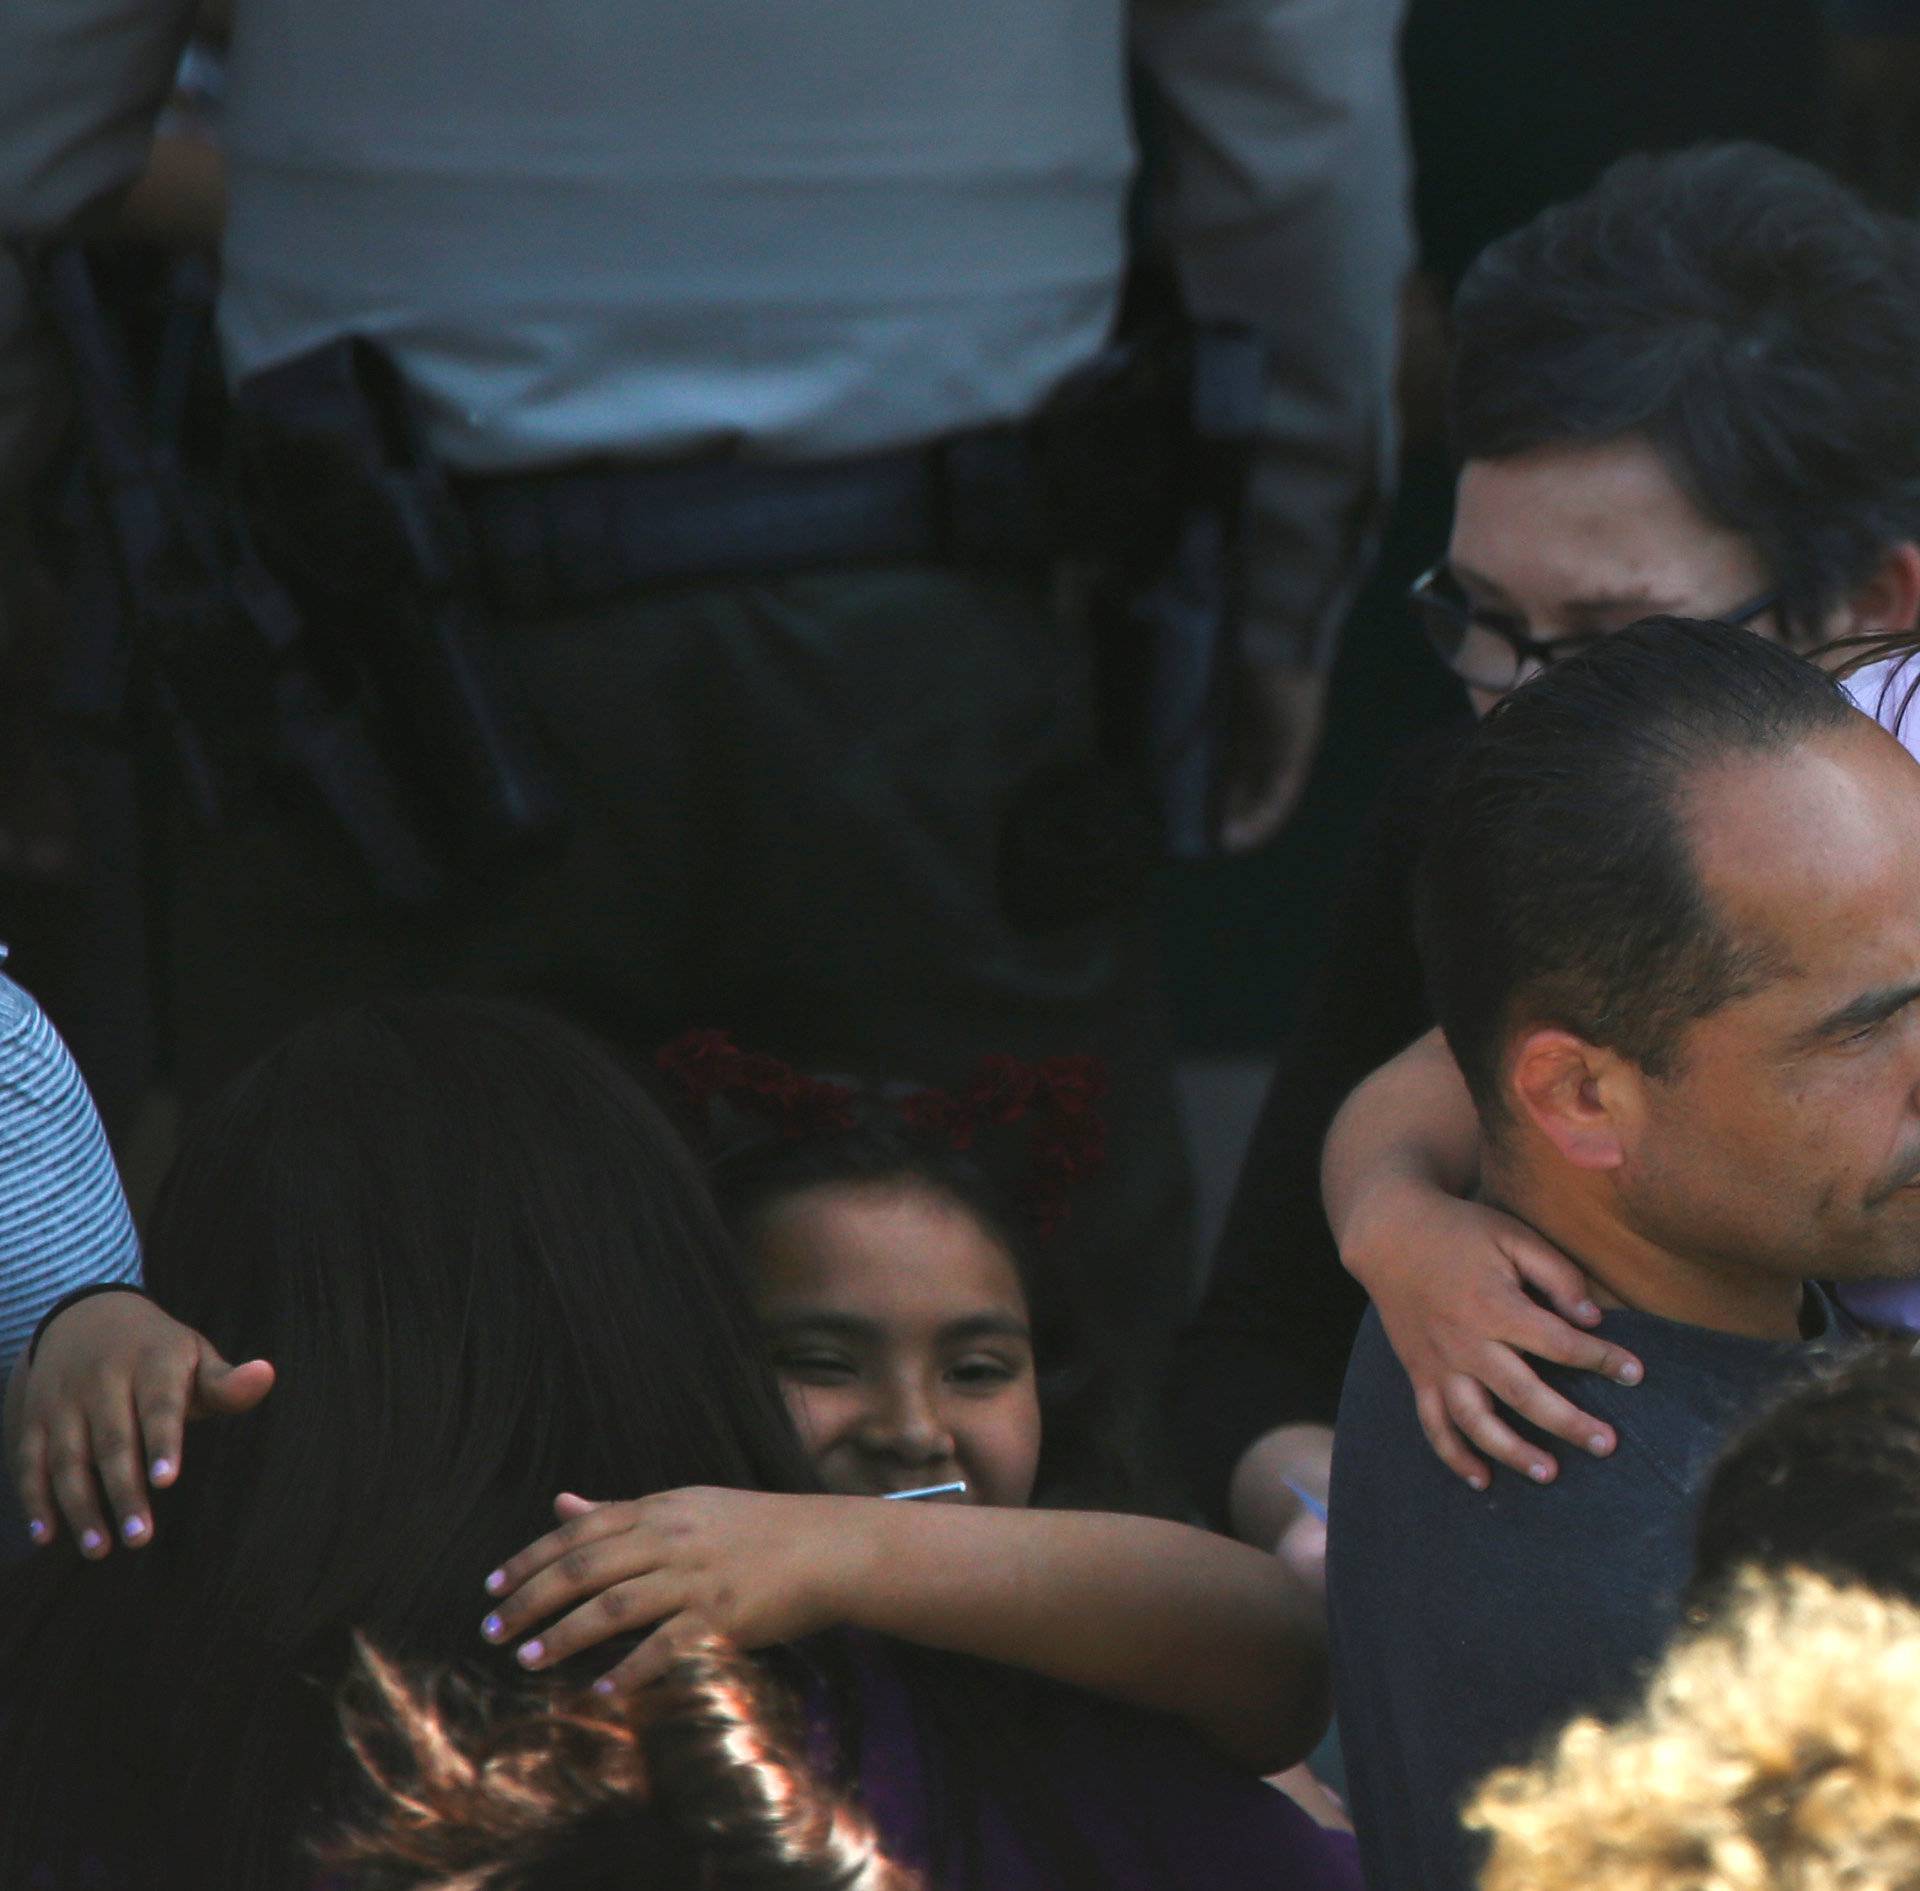 A student who was evacuated after a shooting at North Park Elementary School is embraced after groups of them were reunited with parents waiting at a high school in San Bernardino